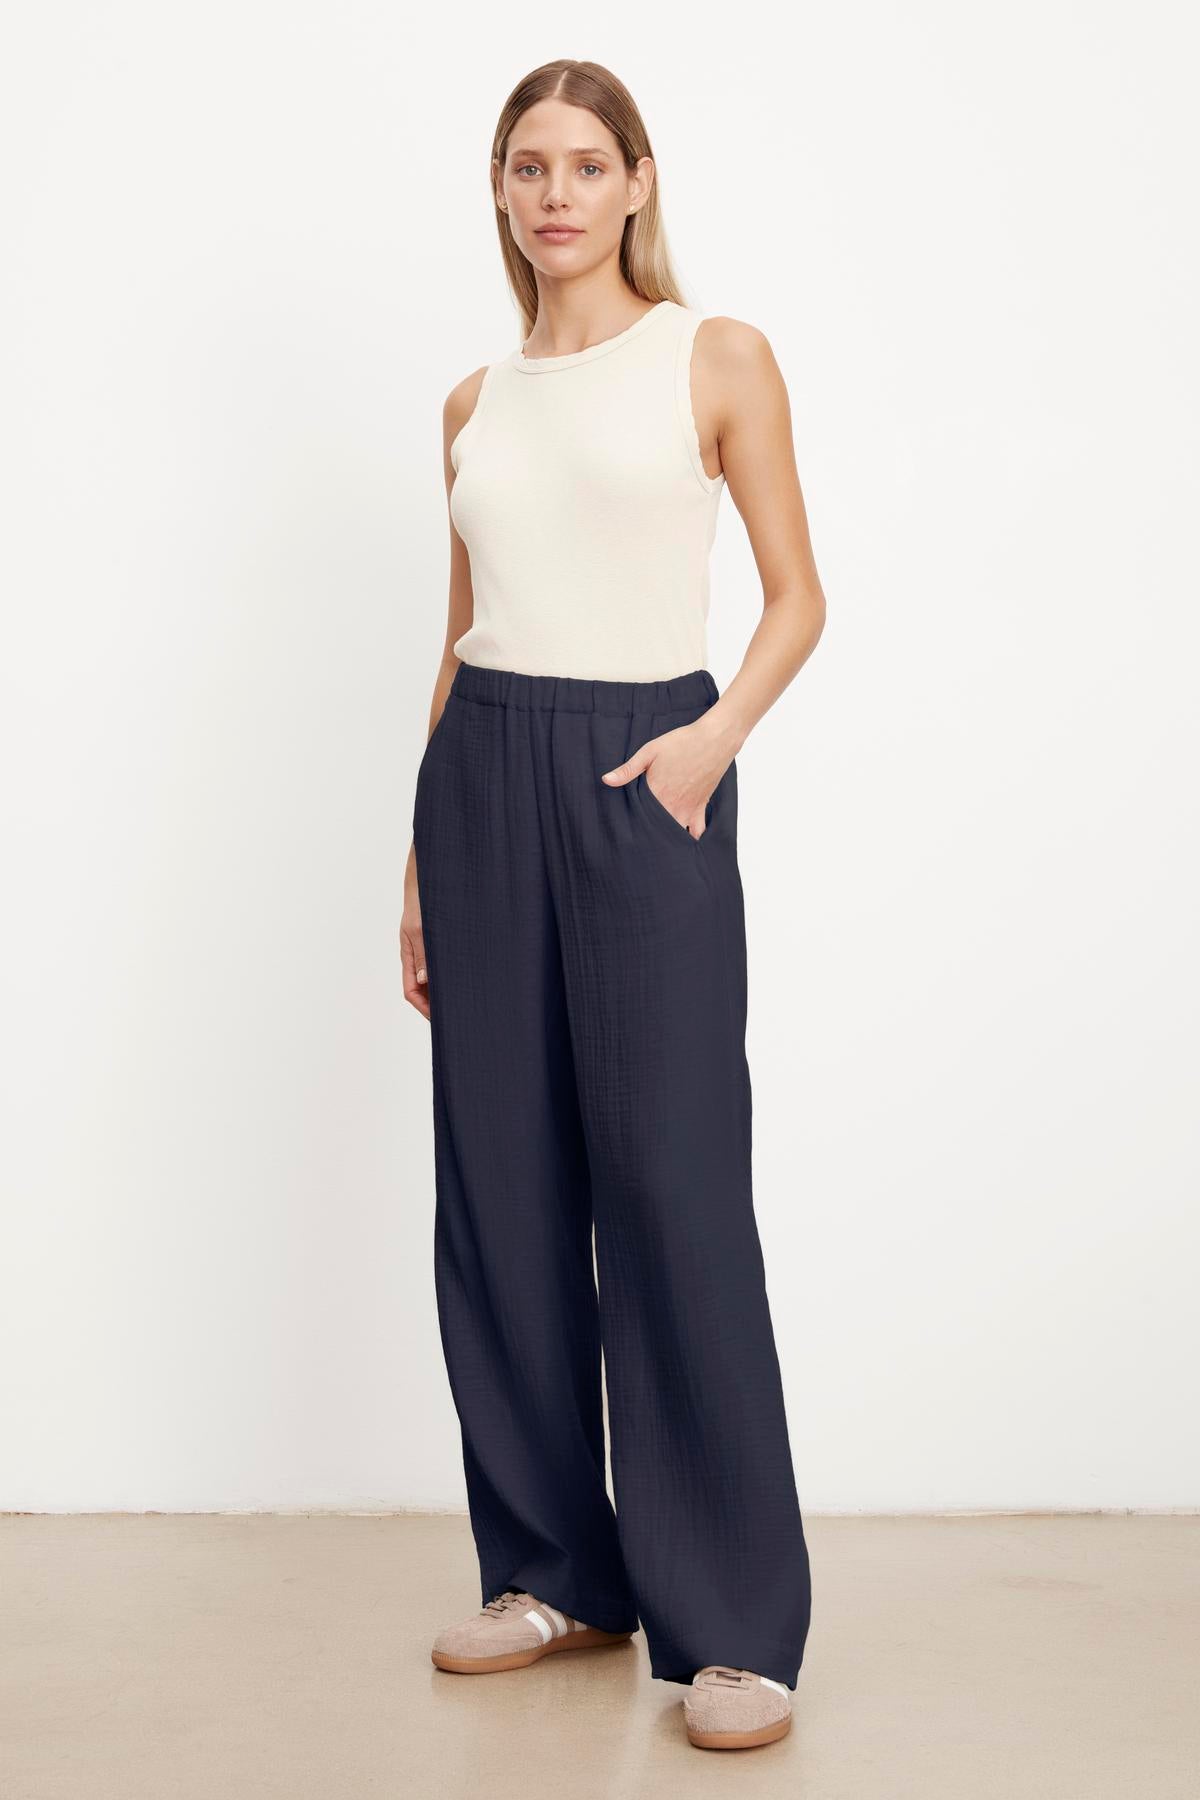 The model is wearing Velvet by Graham & Spencer JERRY COTTON GAUZE PANT navy wide leg trousers with an elastic waistband.-35660385222849